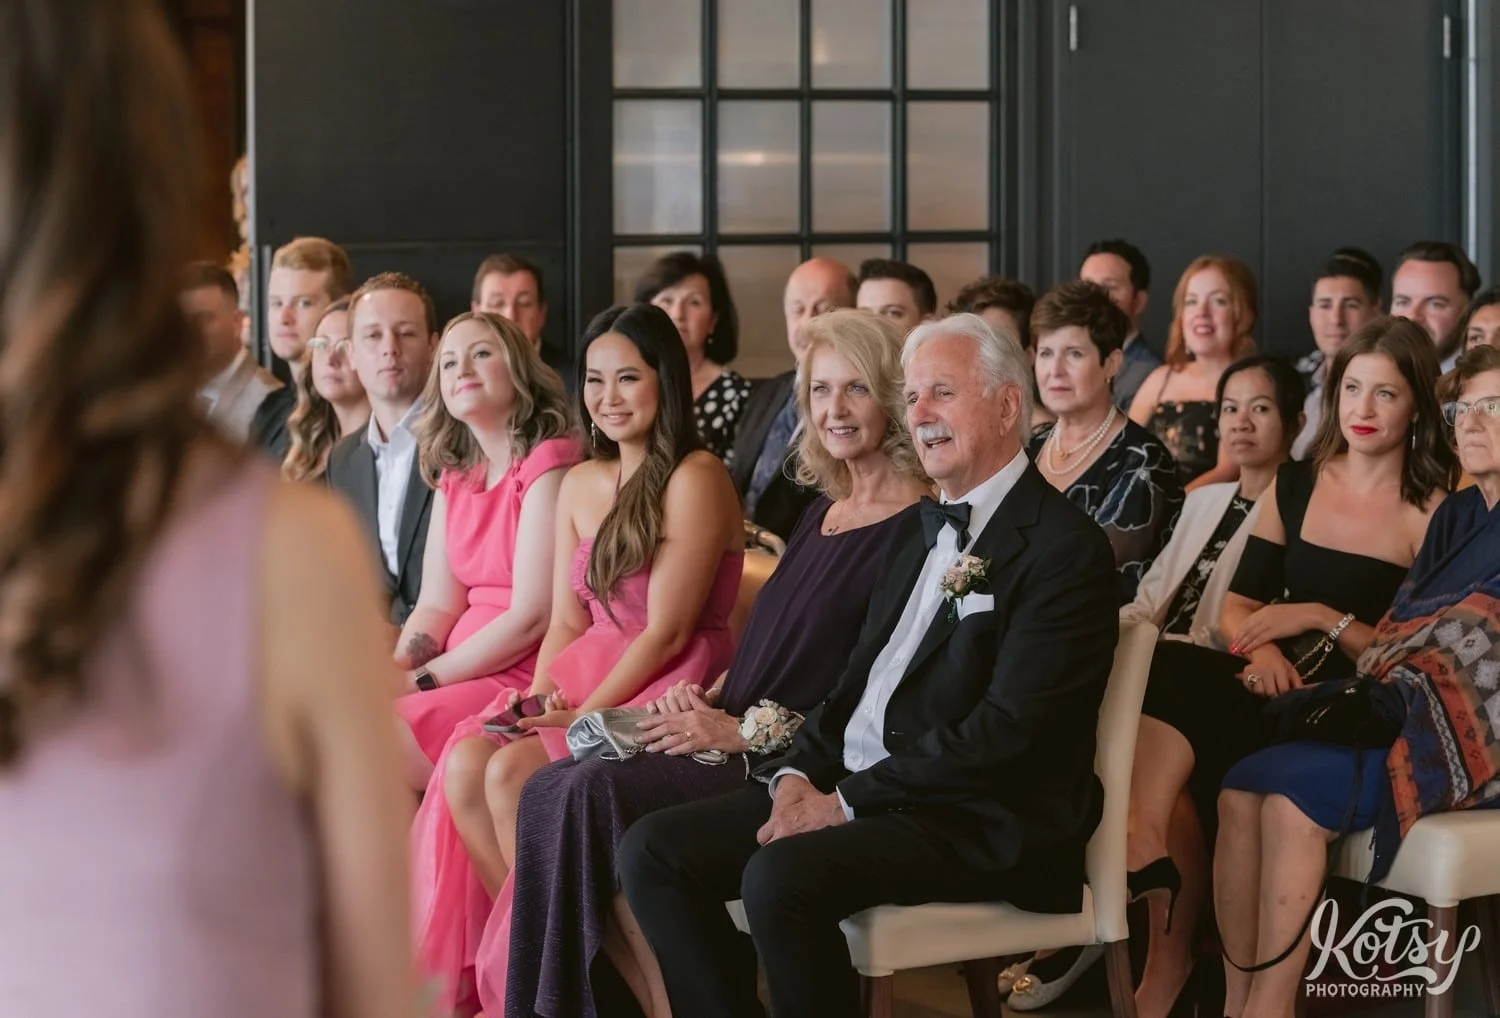 A shot of a groom's parents and many other guests watching a Village Loft wedding ceremony in Toronto, Canada